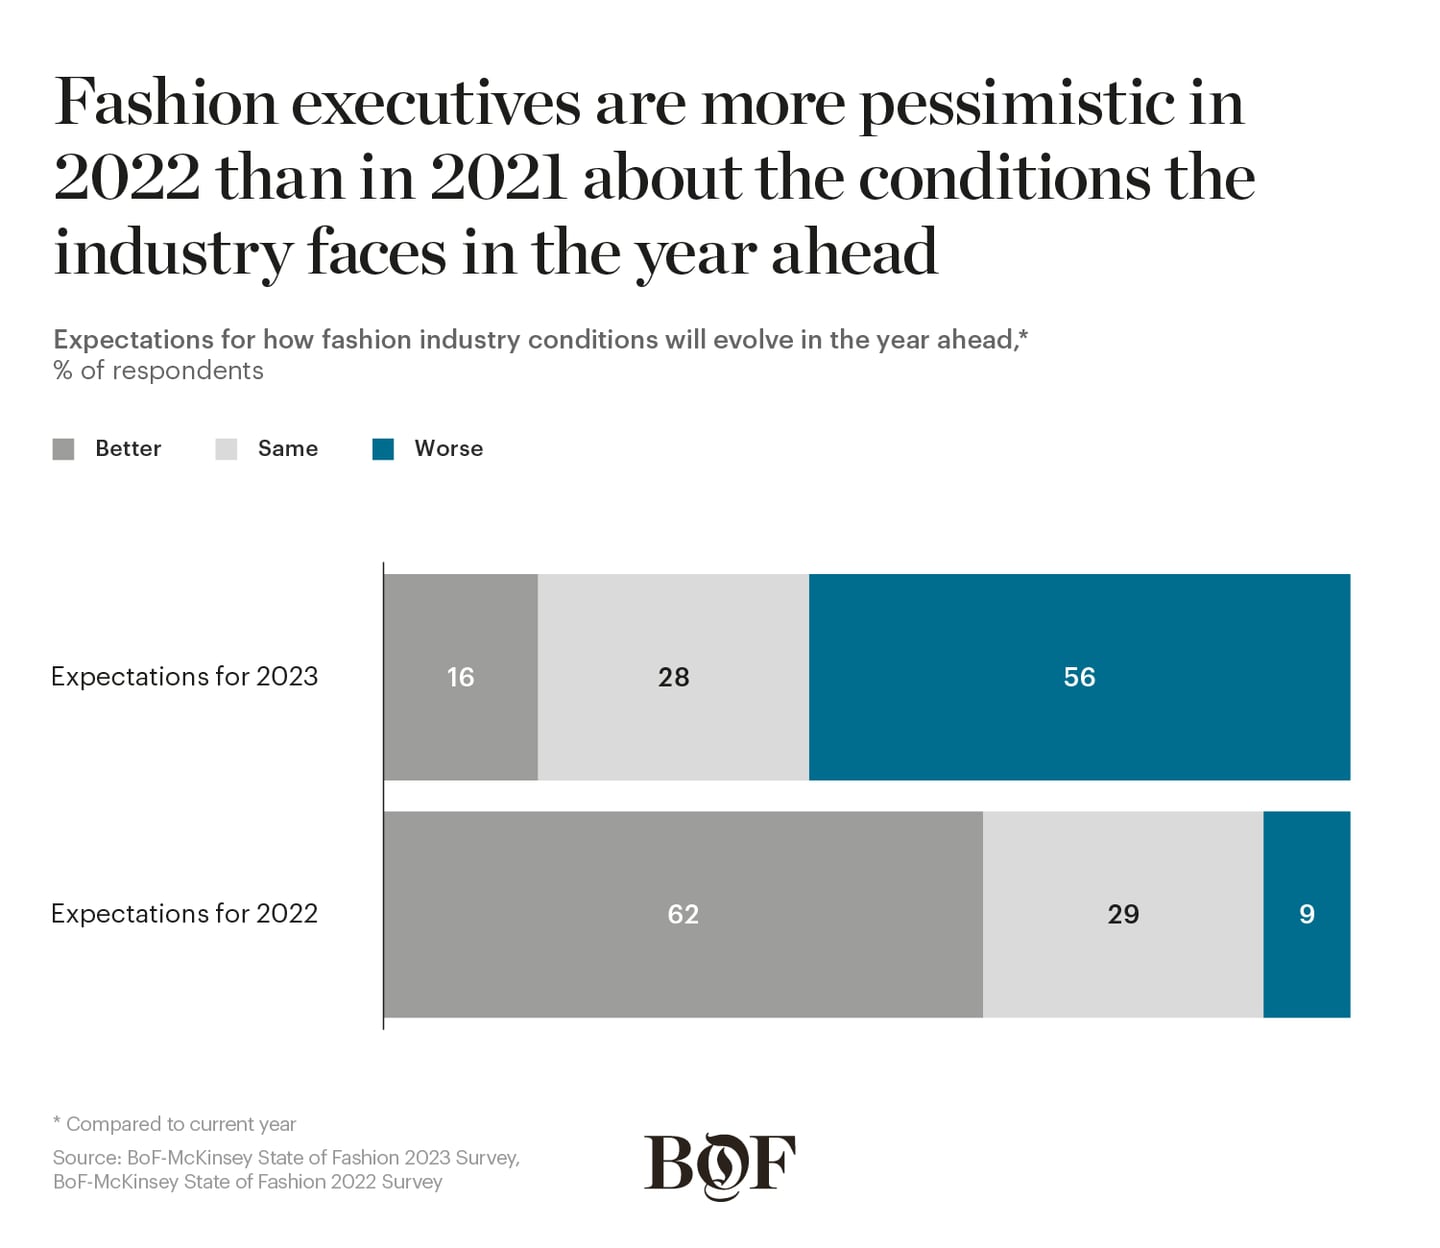 Fashion executives' expectations for conditions in 2023